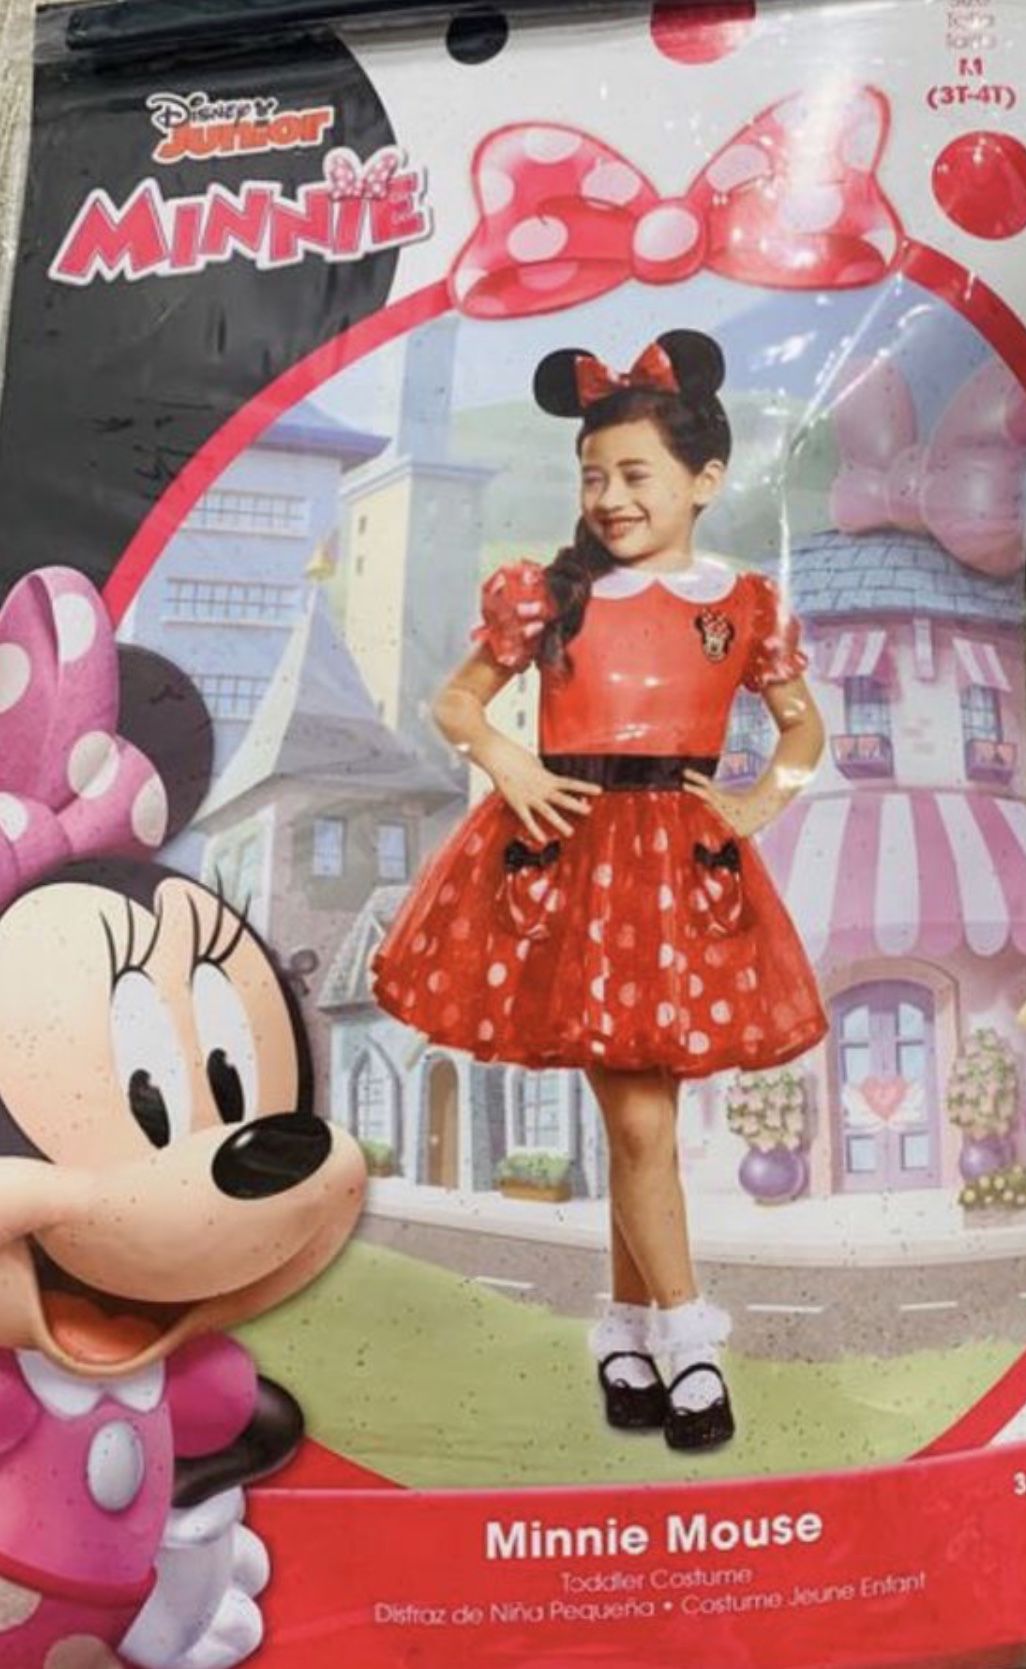 Halloween Costume - Minnie Mouse, Toddler Girl, Size 3T - 4T